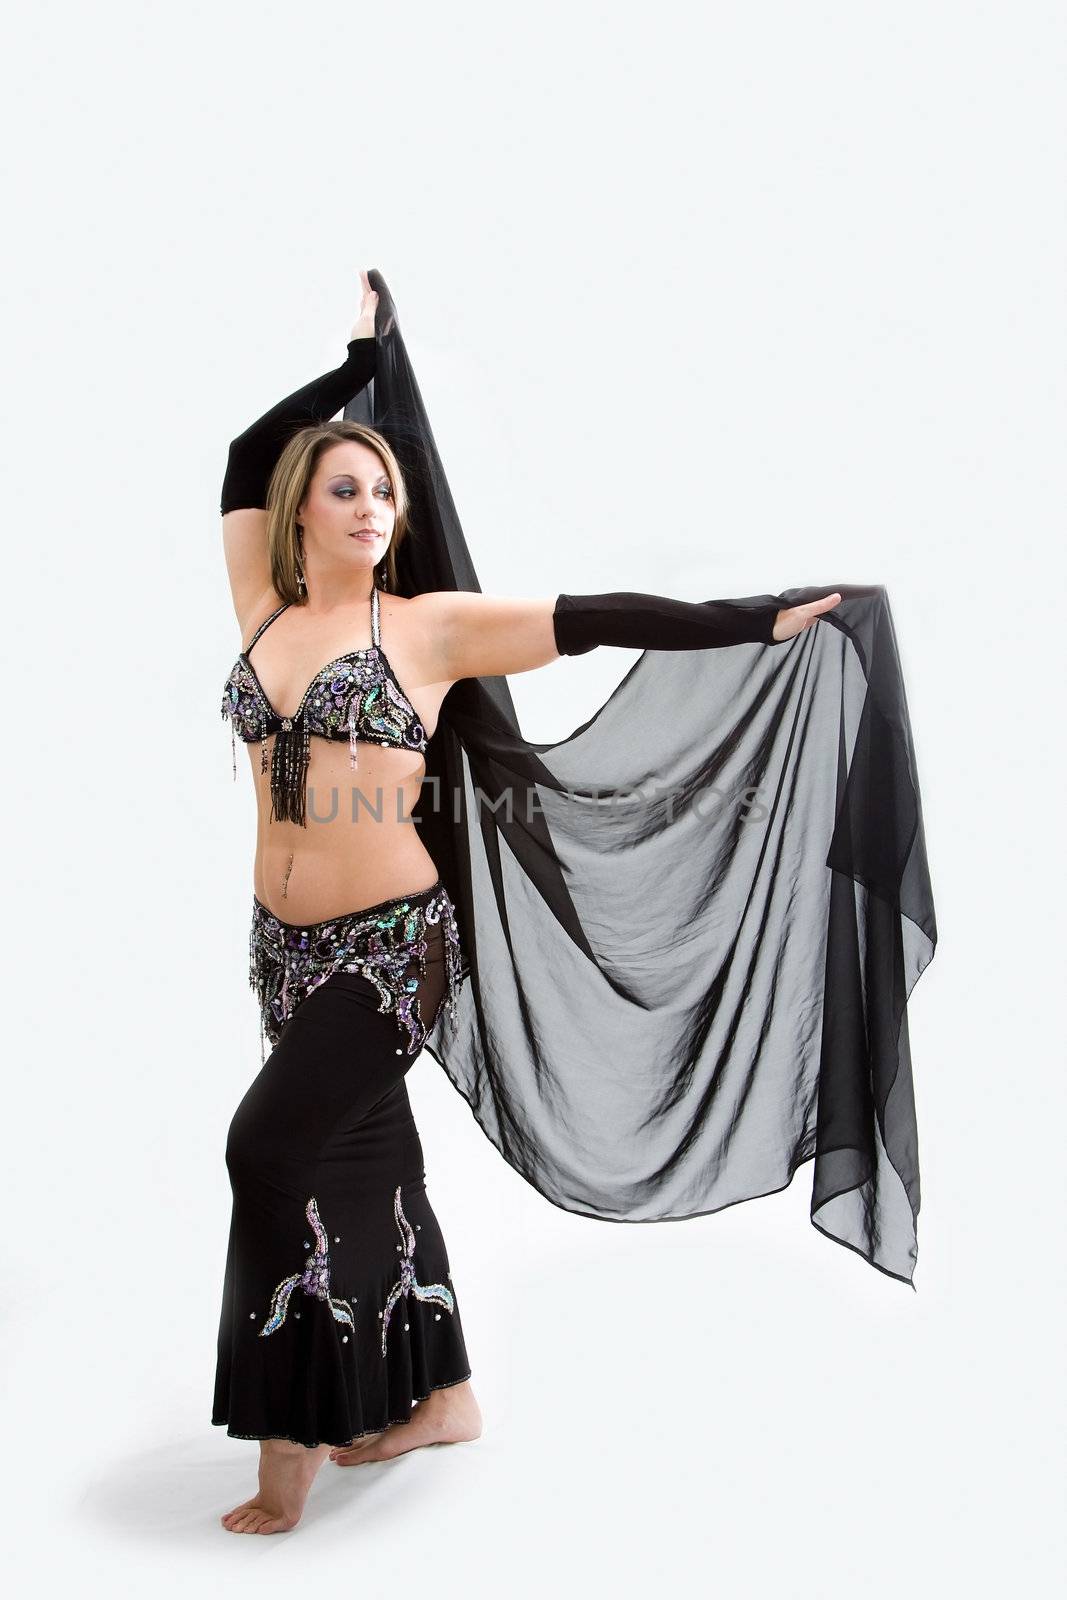 Beautiful belly dancer in black outfit holding veil, isolated